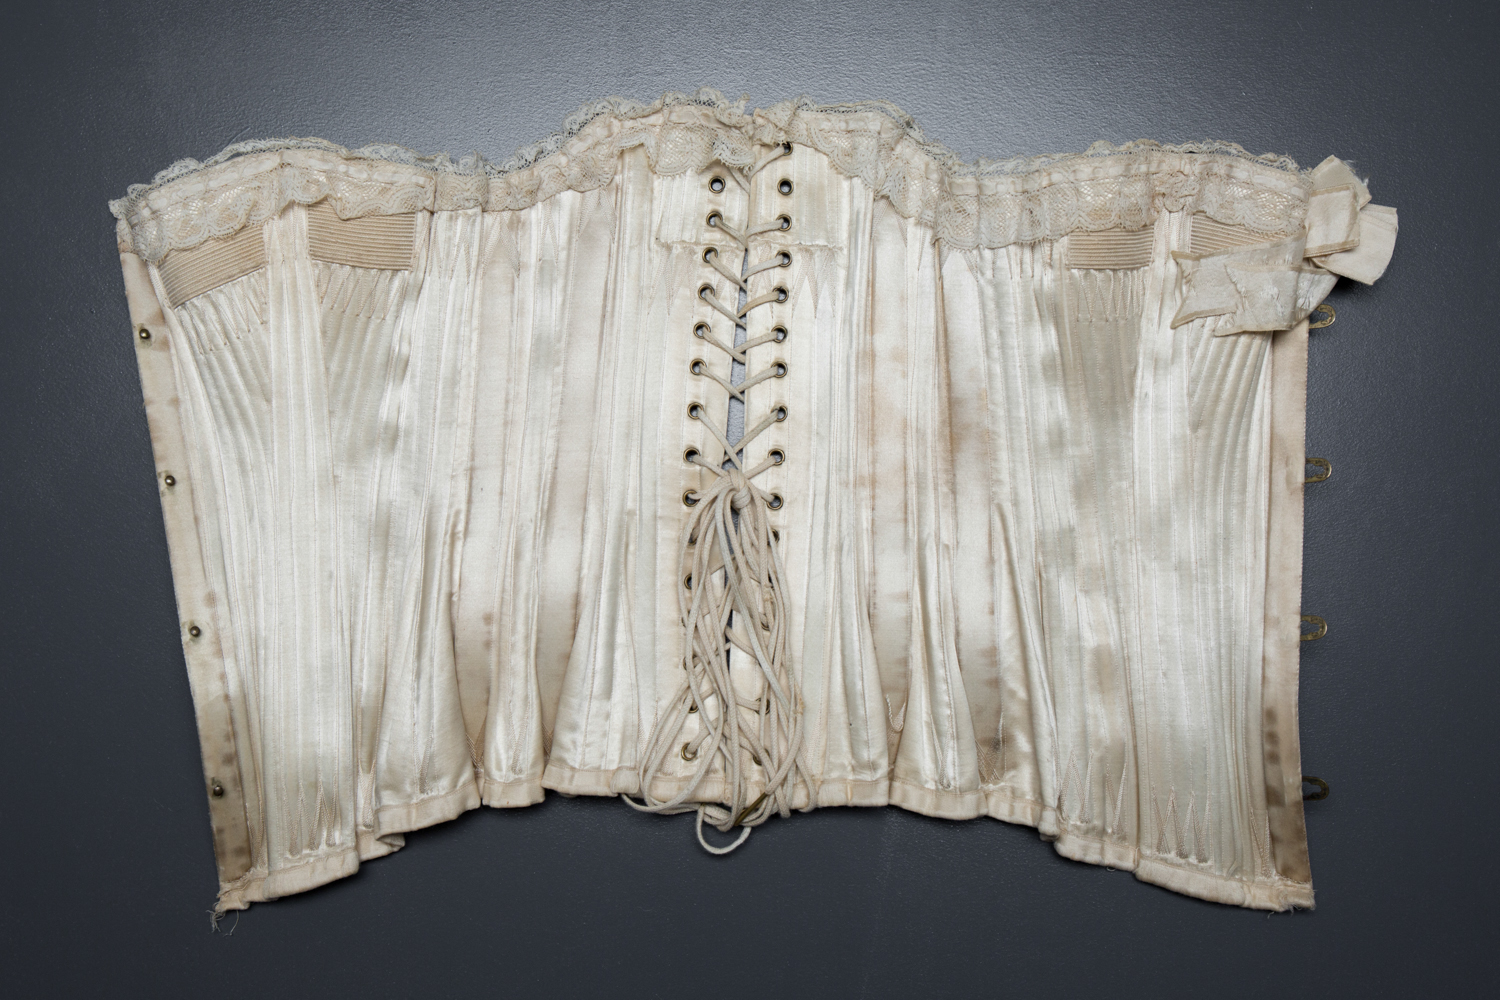 'Stella' Ivory Satin Corset With Flossing Embroidery & Cording by C. T., c. 1900, made in France for the USA market. The Underpinnings Museum. Photography by Tigz Rice.